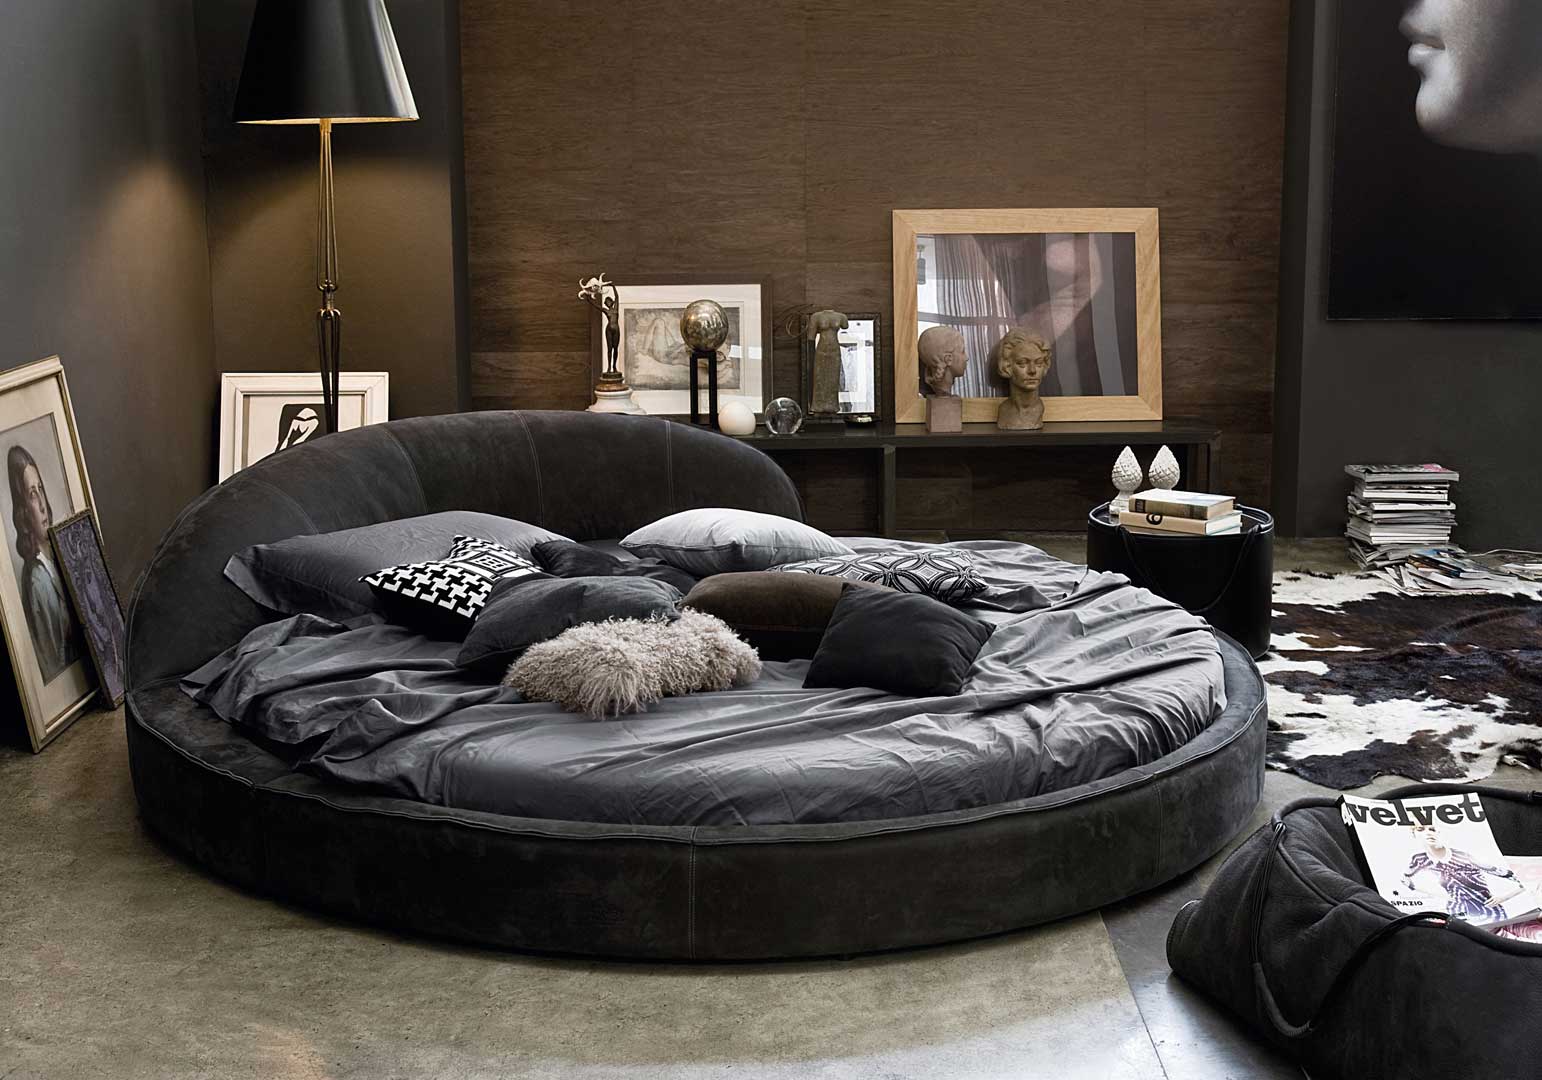 An extraordinary round bed to furnish the most elegant bedrooms. Leather covered. Wood frame. Many colours available. Online shopping, free delivery.